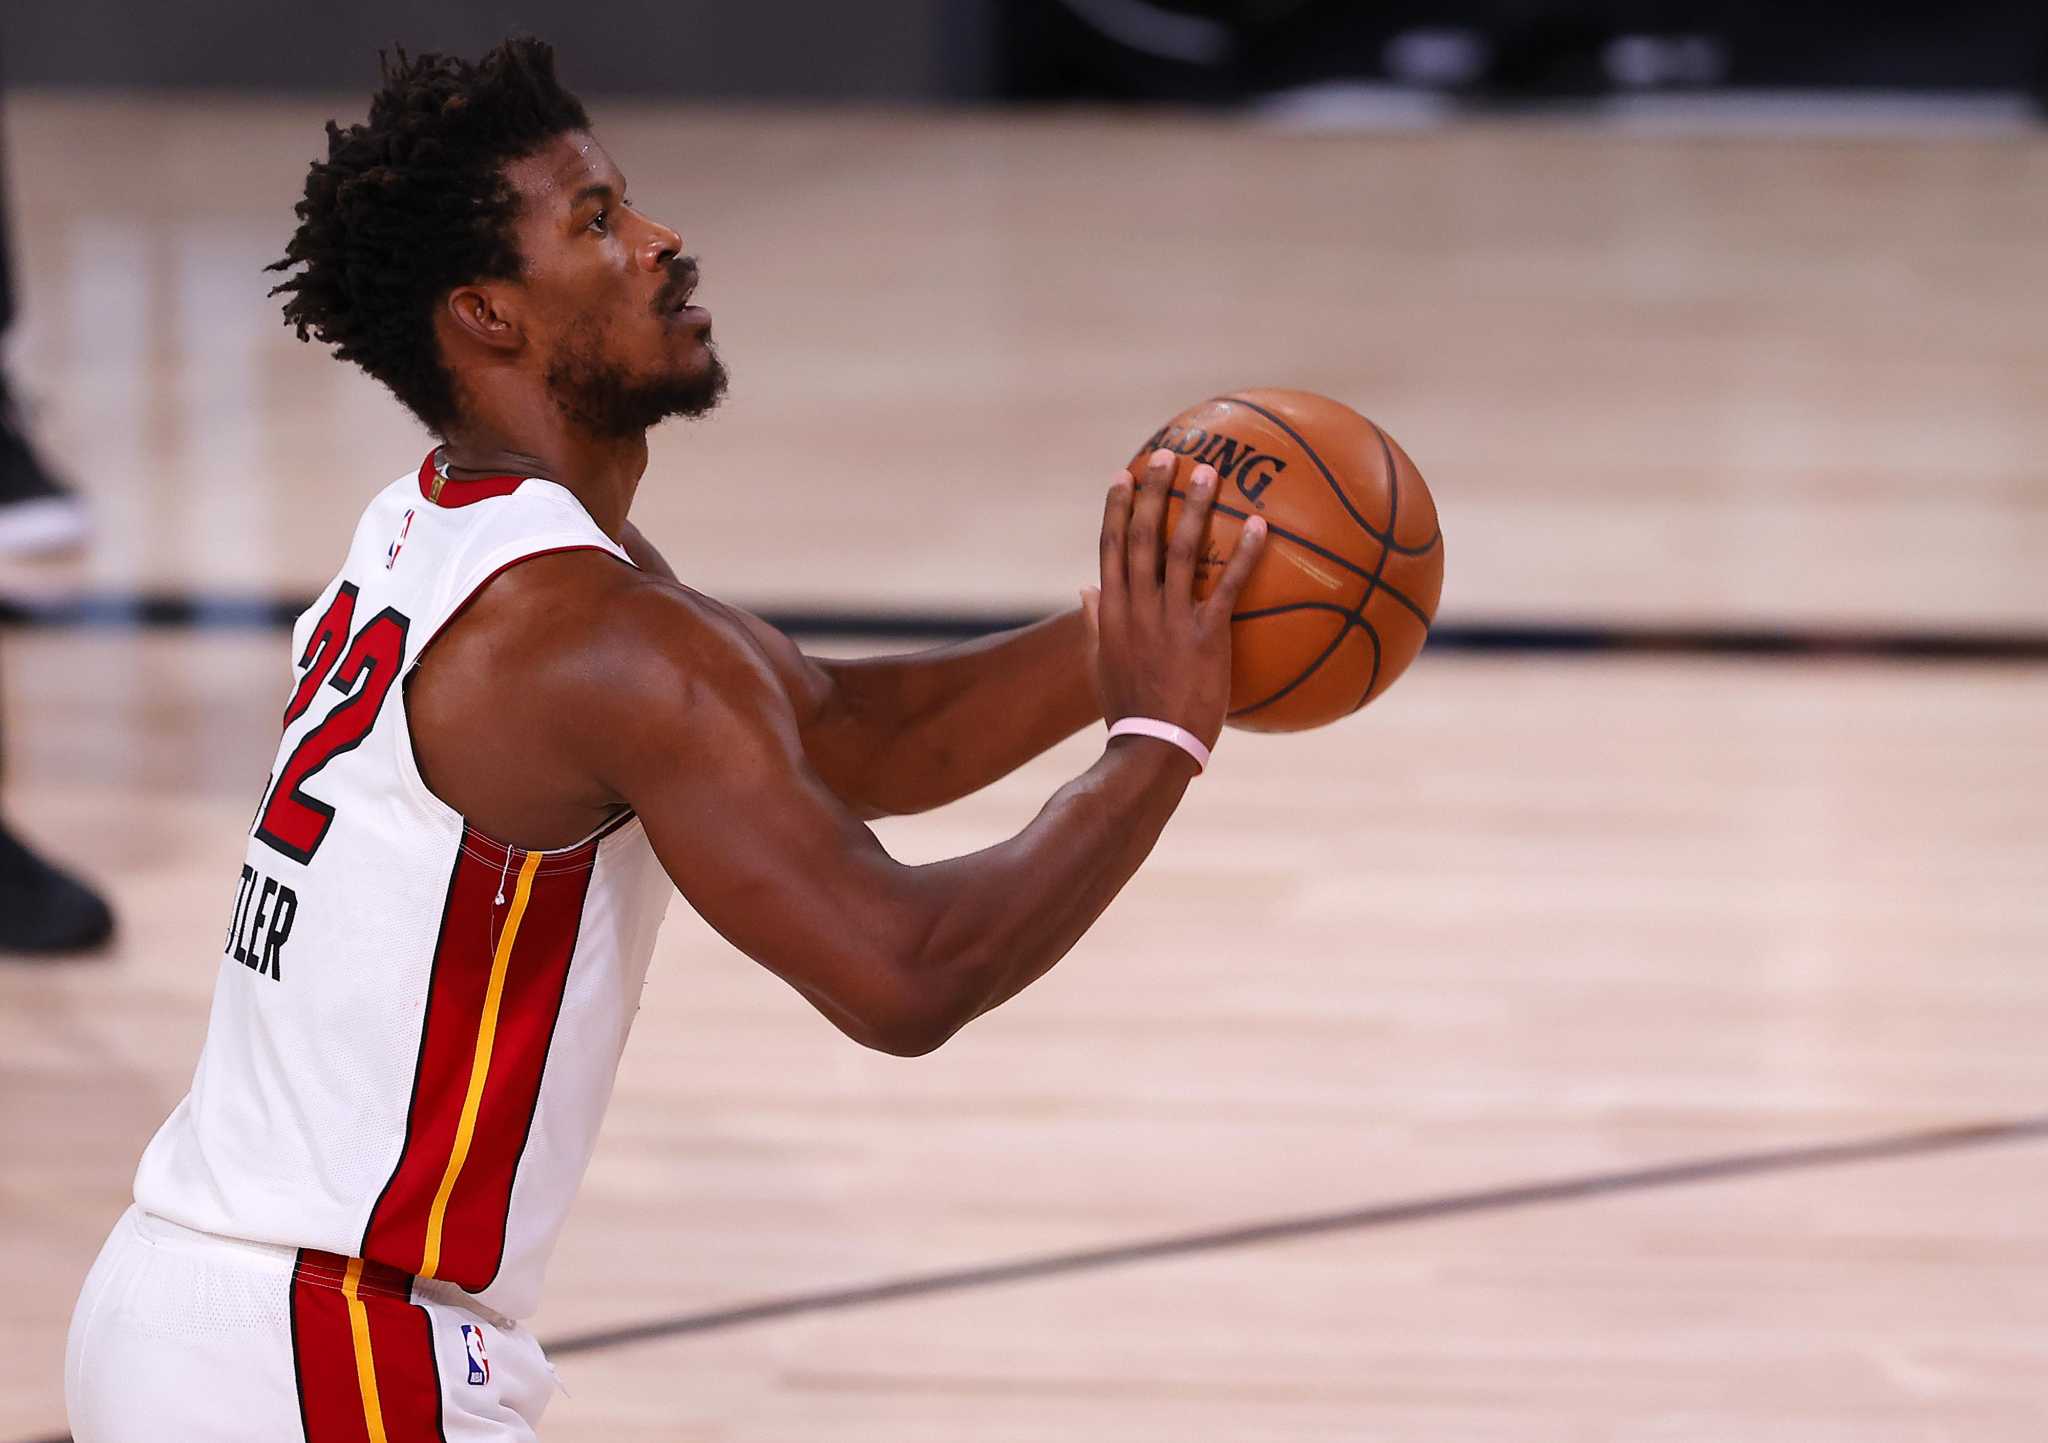 Jimmy Butler To Sit Out Wednesday As He Continues Push For Trade